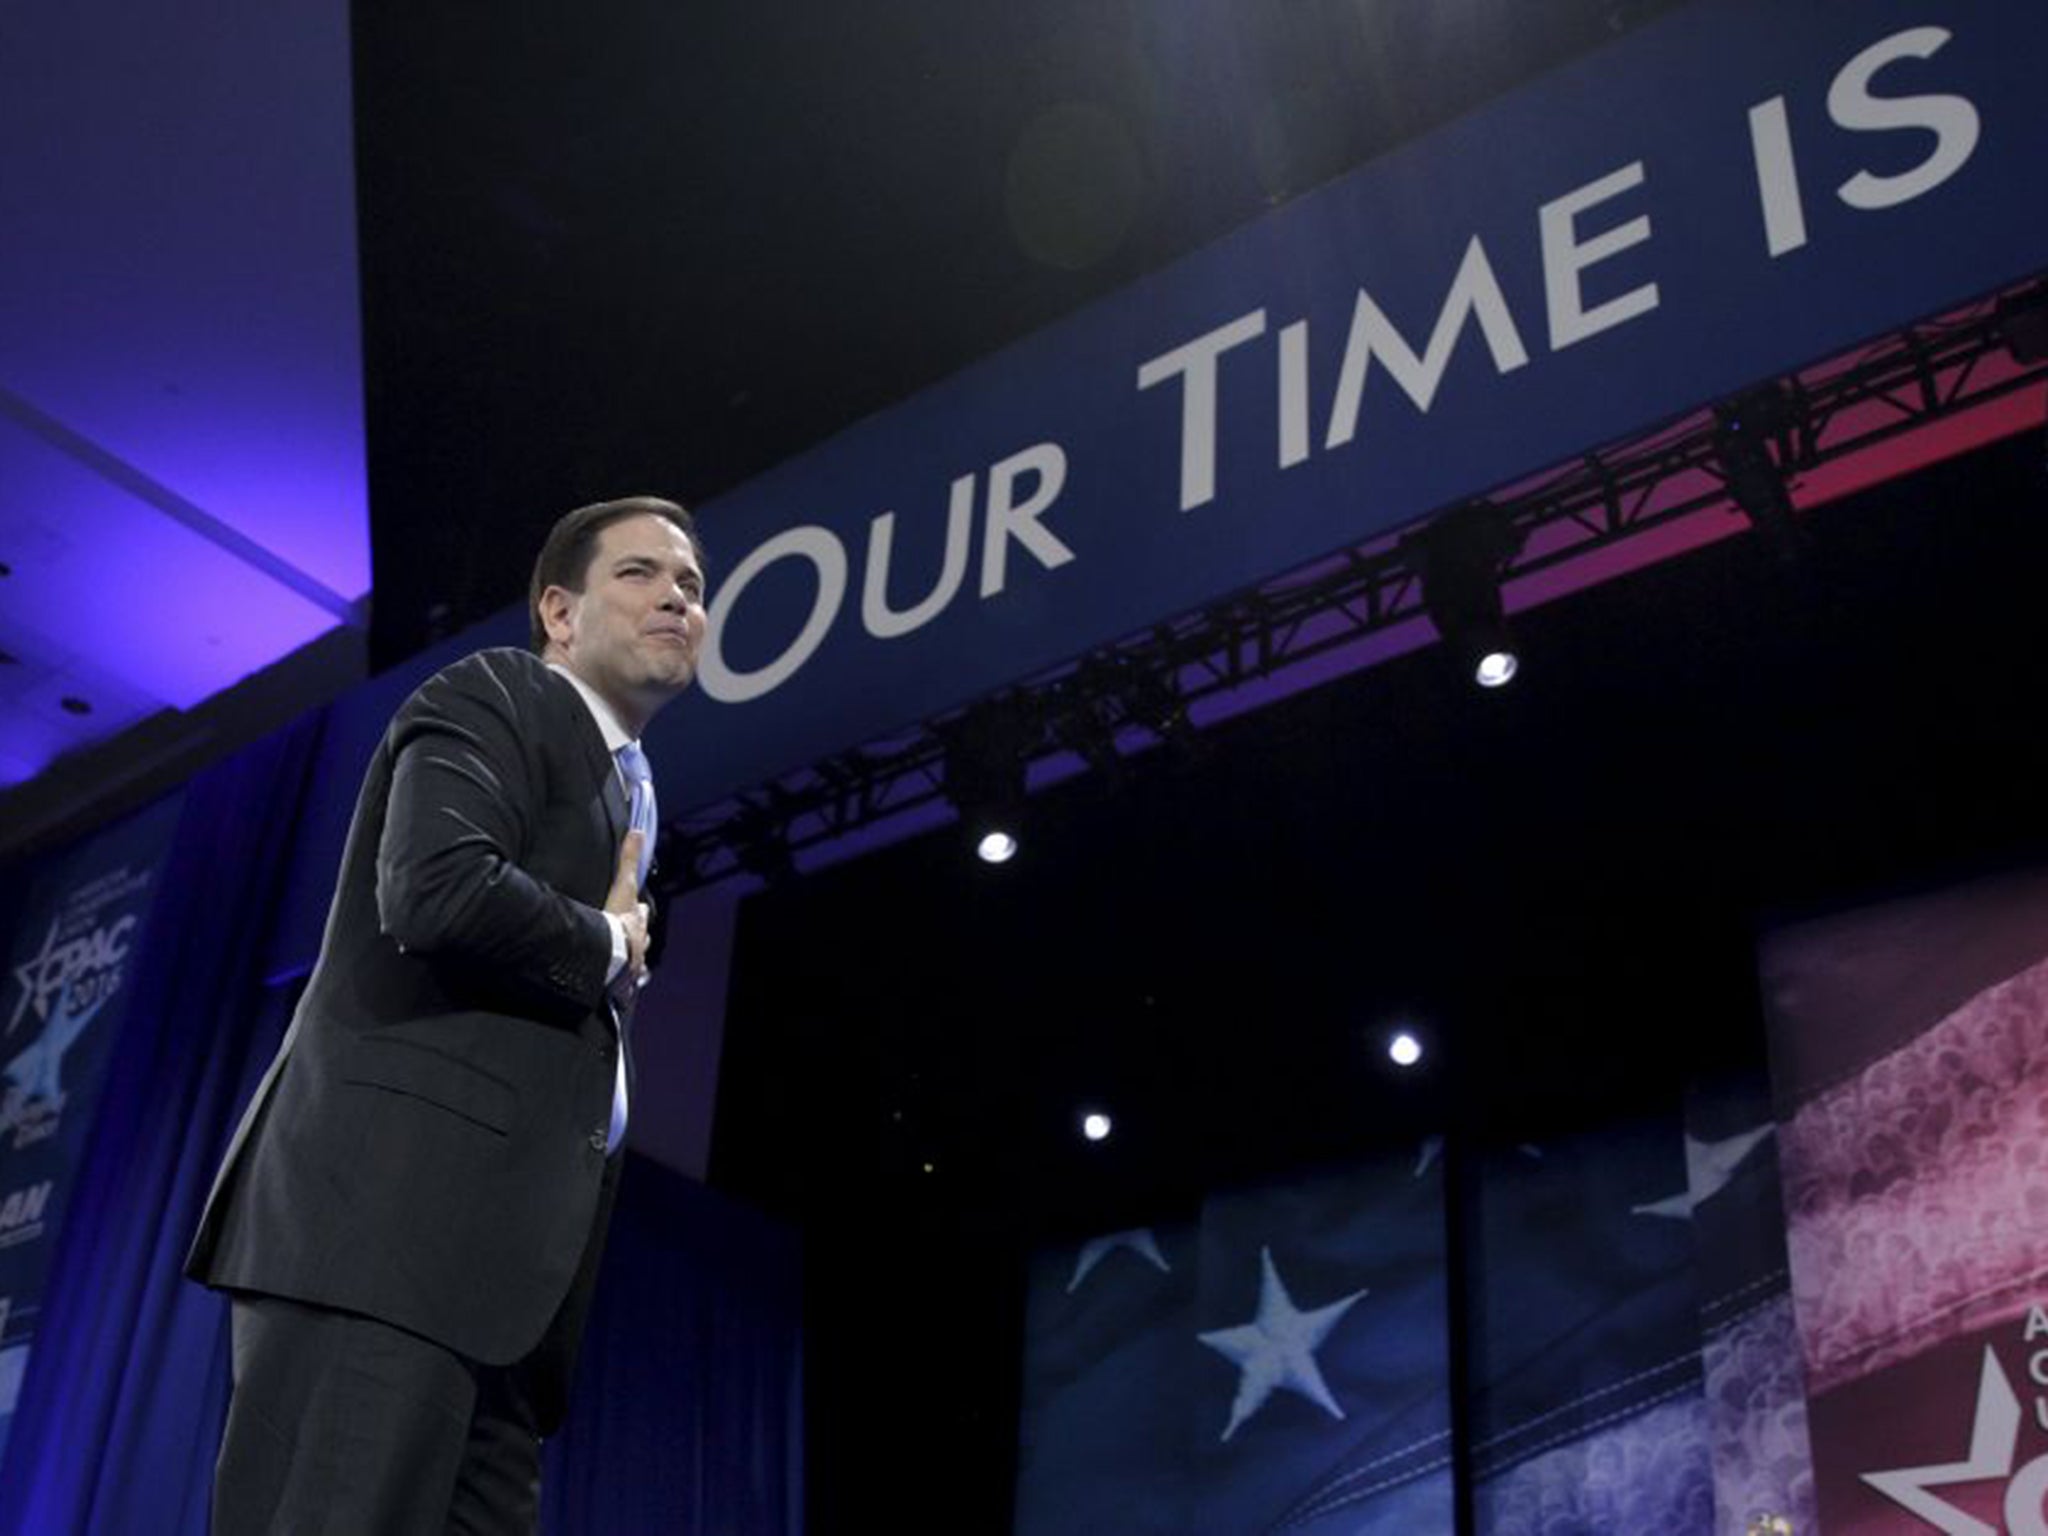 Marco Rubio at the conservative conference declined by Donald Trump